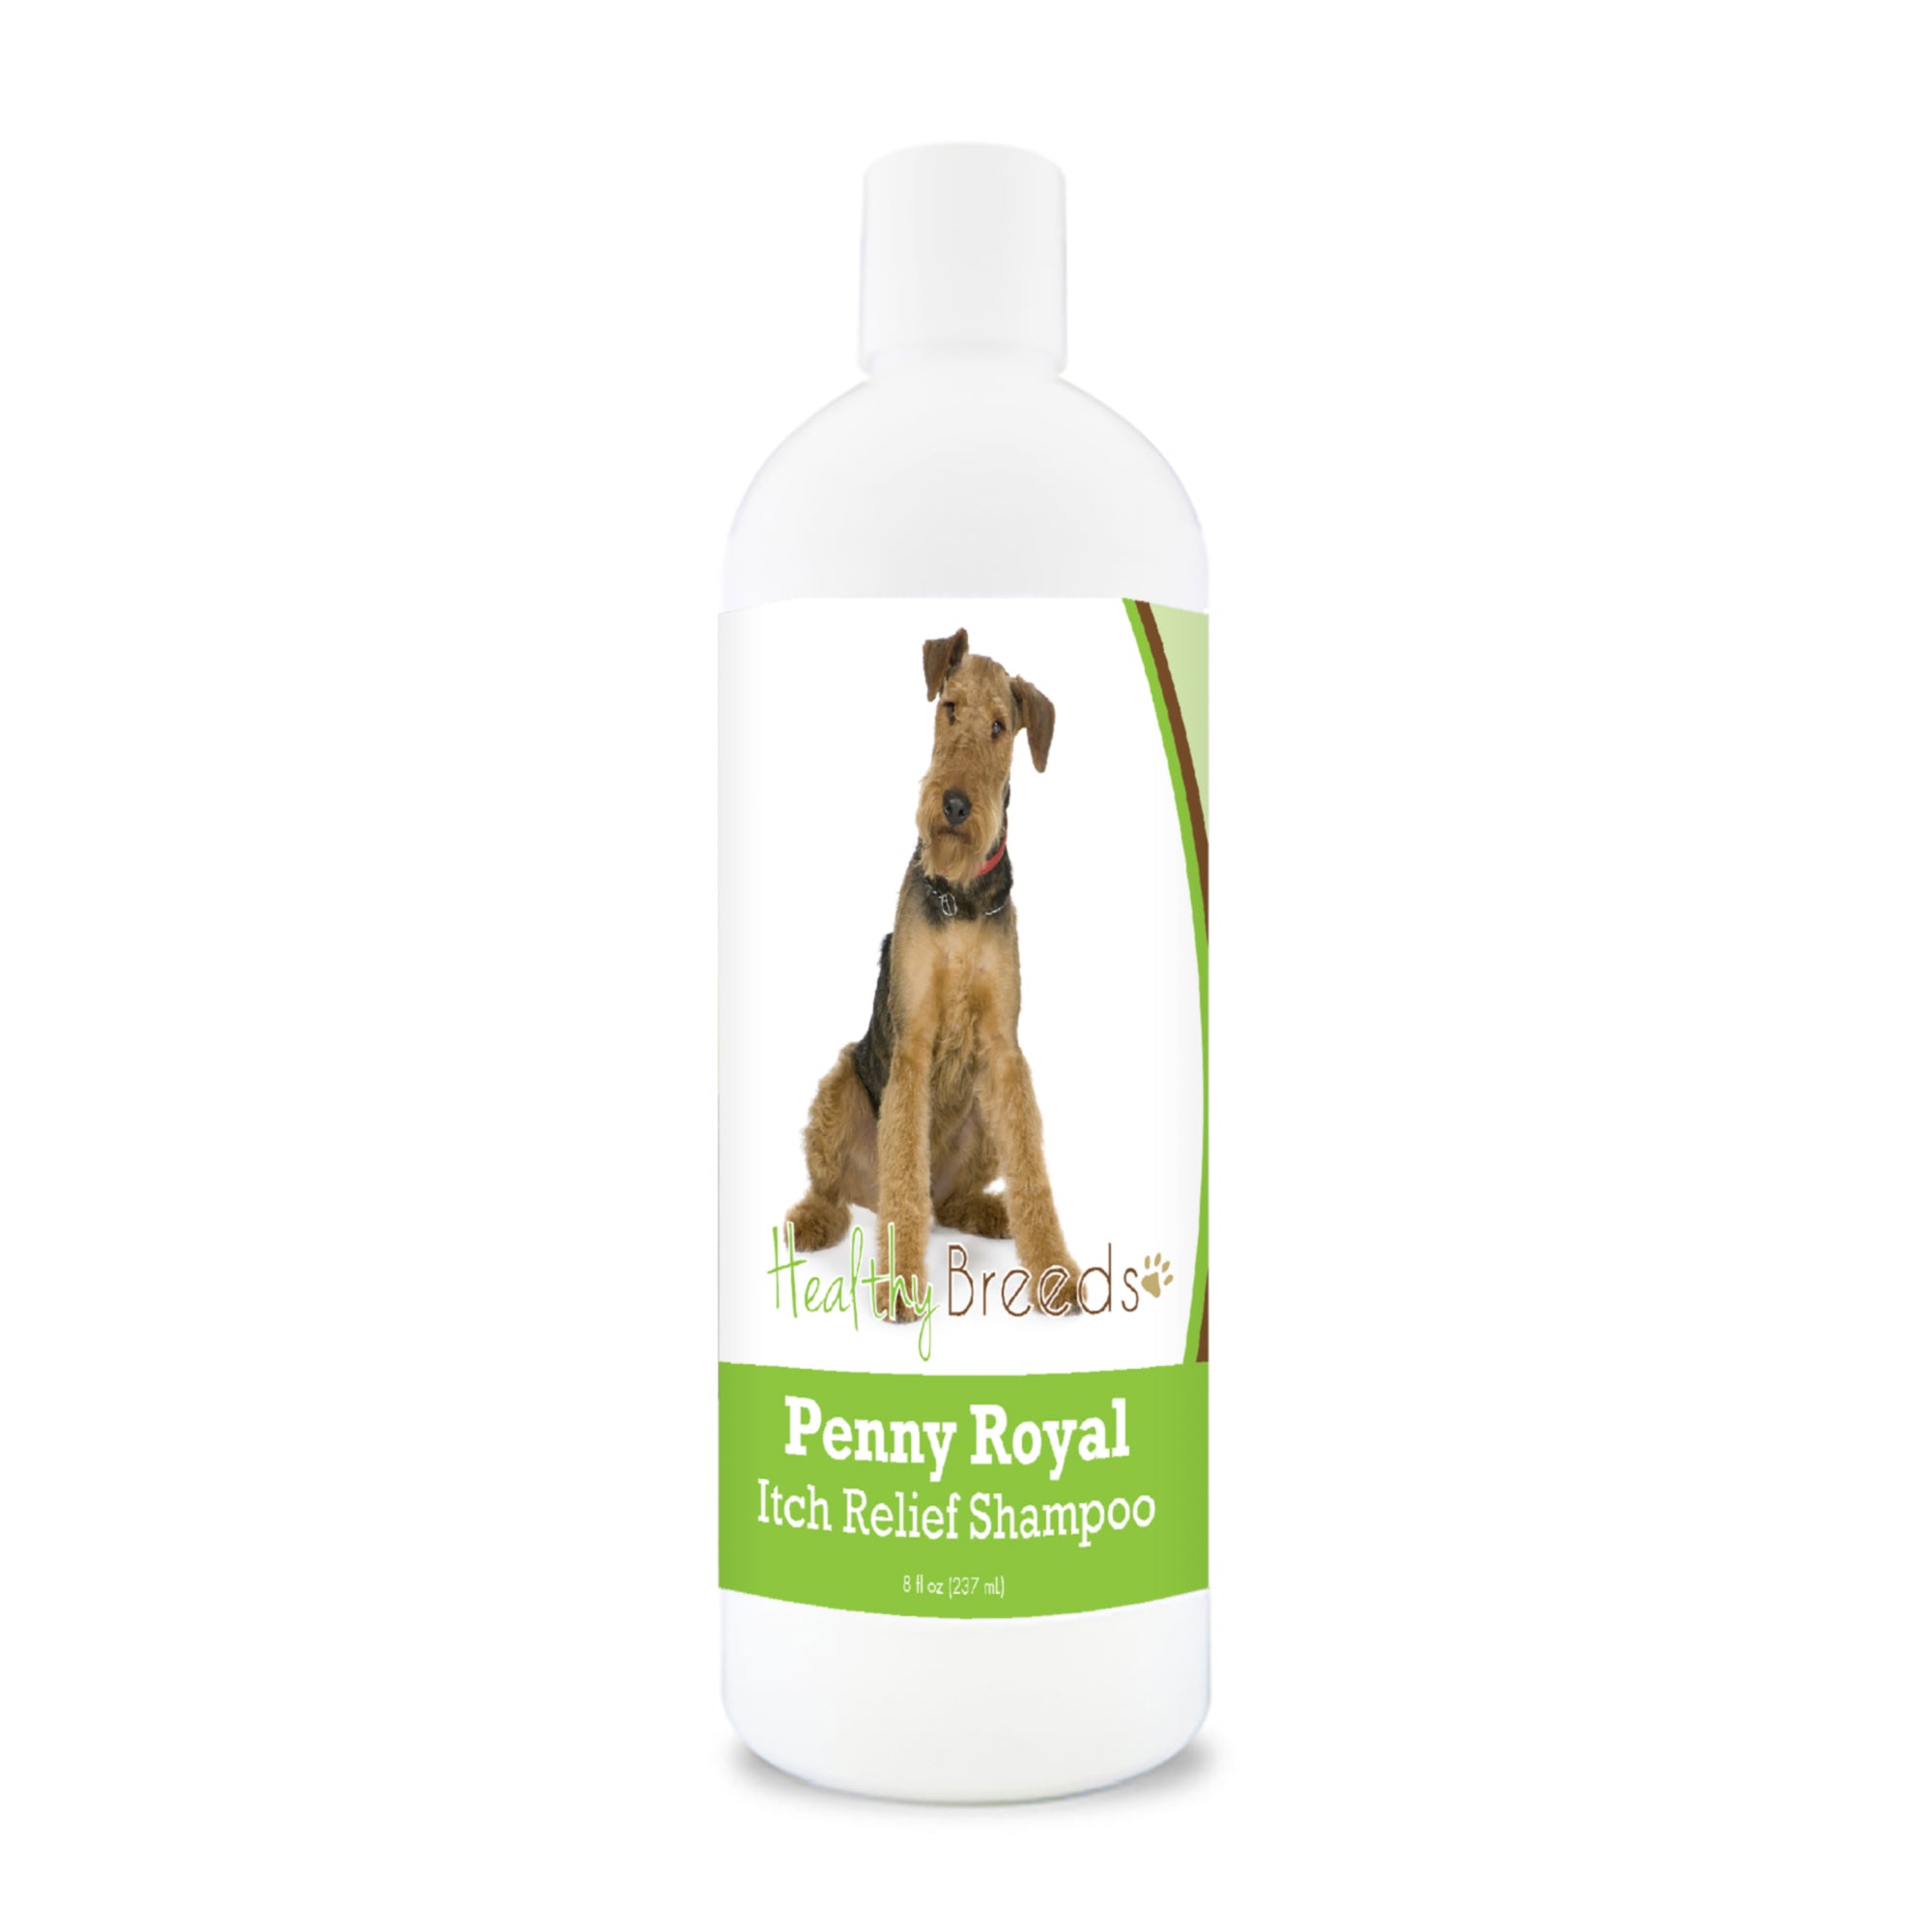 Airedale Terrier Penny Royal Itch Relief Shampoo 8 oz